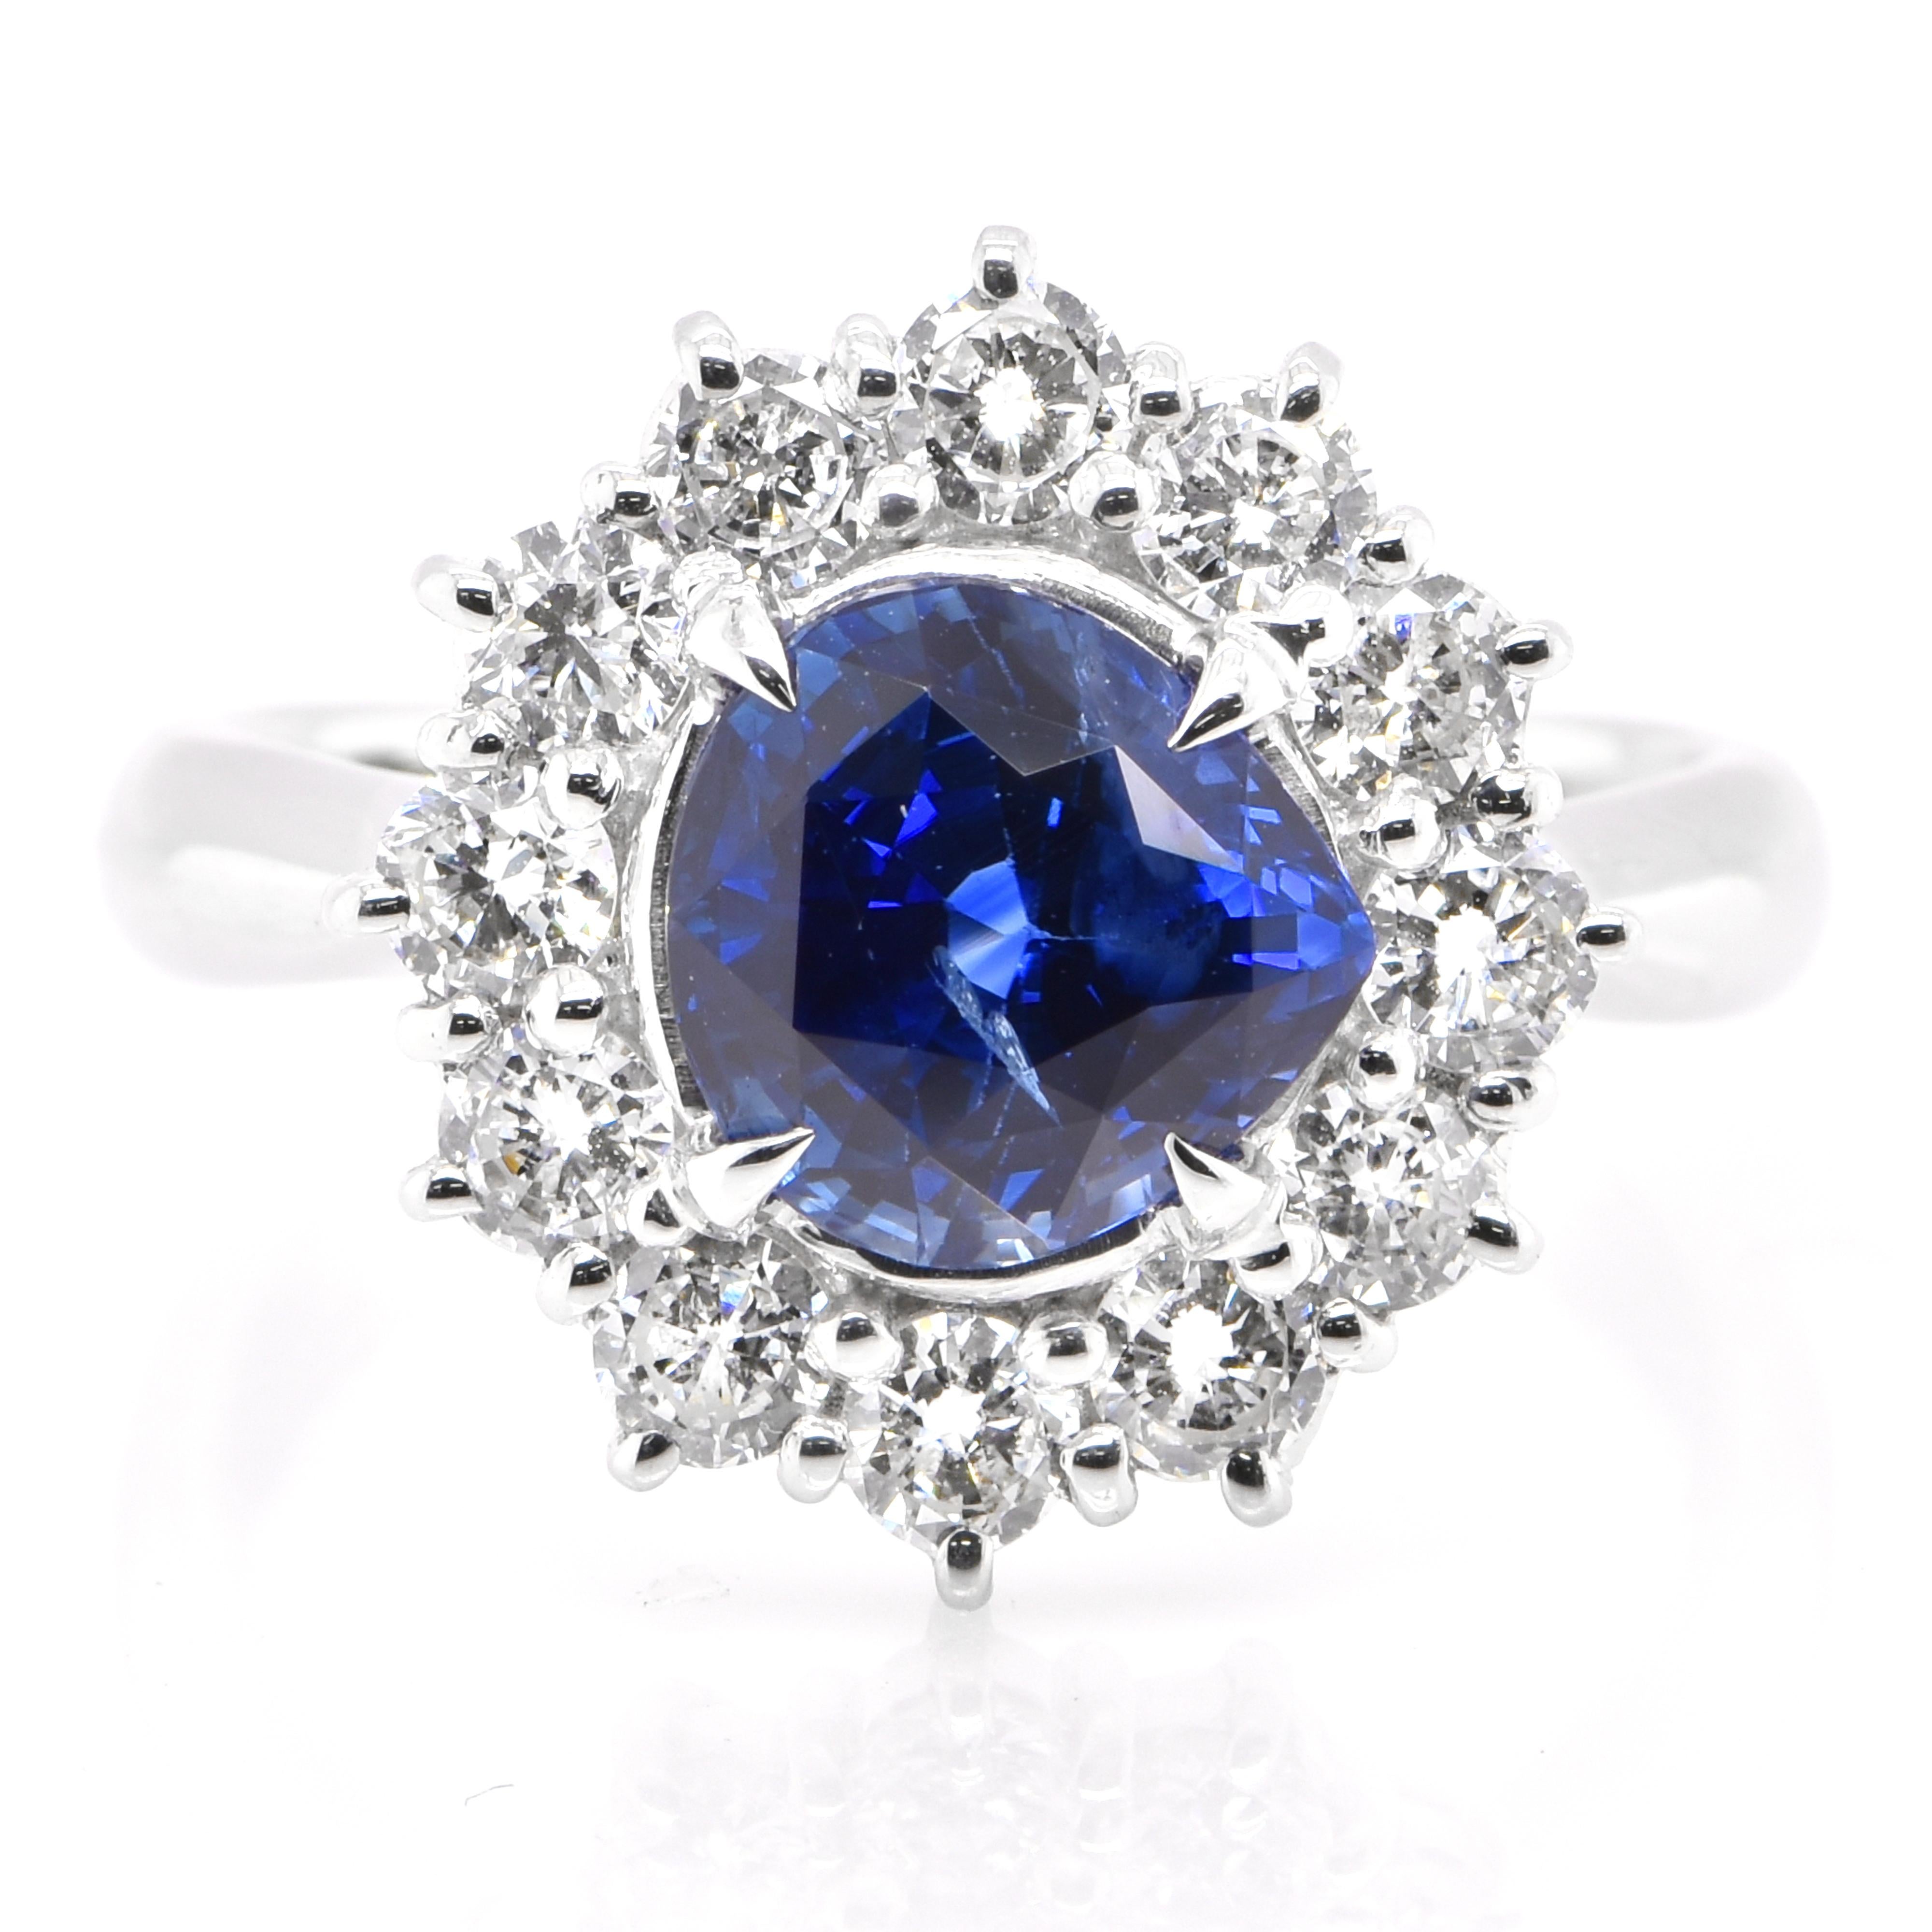 A beautiful ring featuring a 2.578 Carat, Natural Blue Sapphire and 0.898 Carats Diamond Accents set in Platinum. Sapphires have extraordinary durability - they excel in hardness as well as toughness and durability making them very popular in